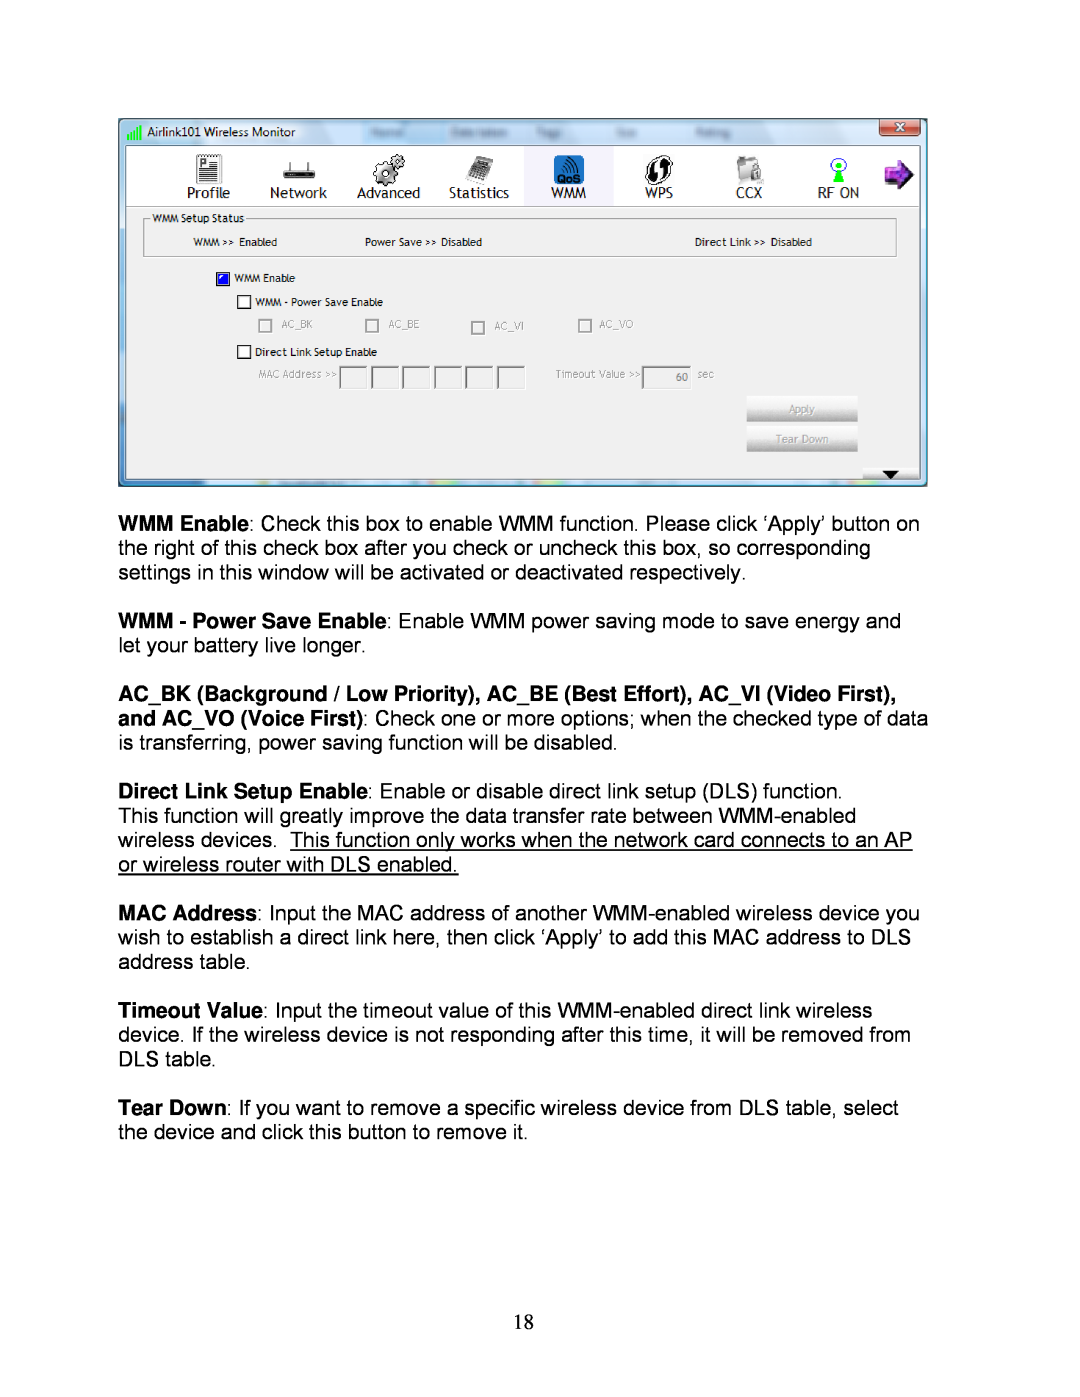 Airlink101 AWLH6075 user manual 